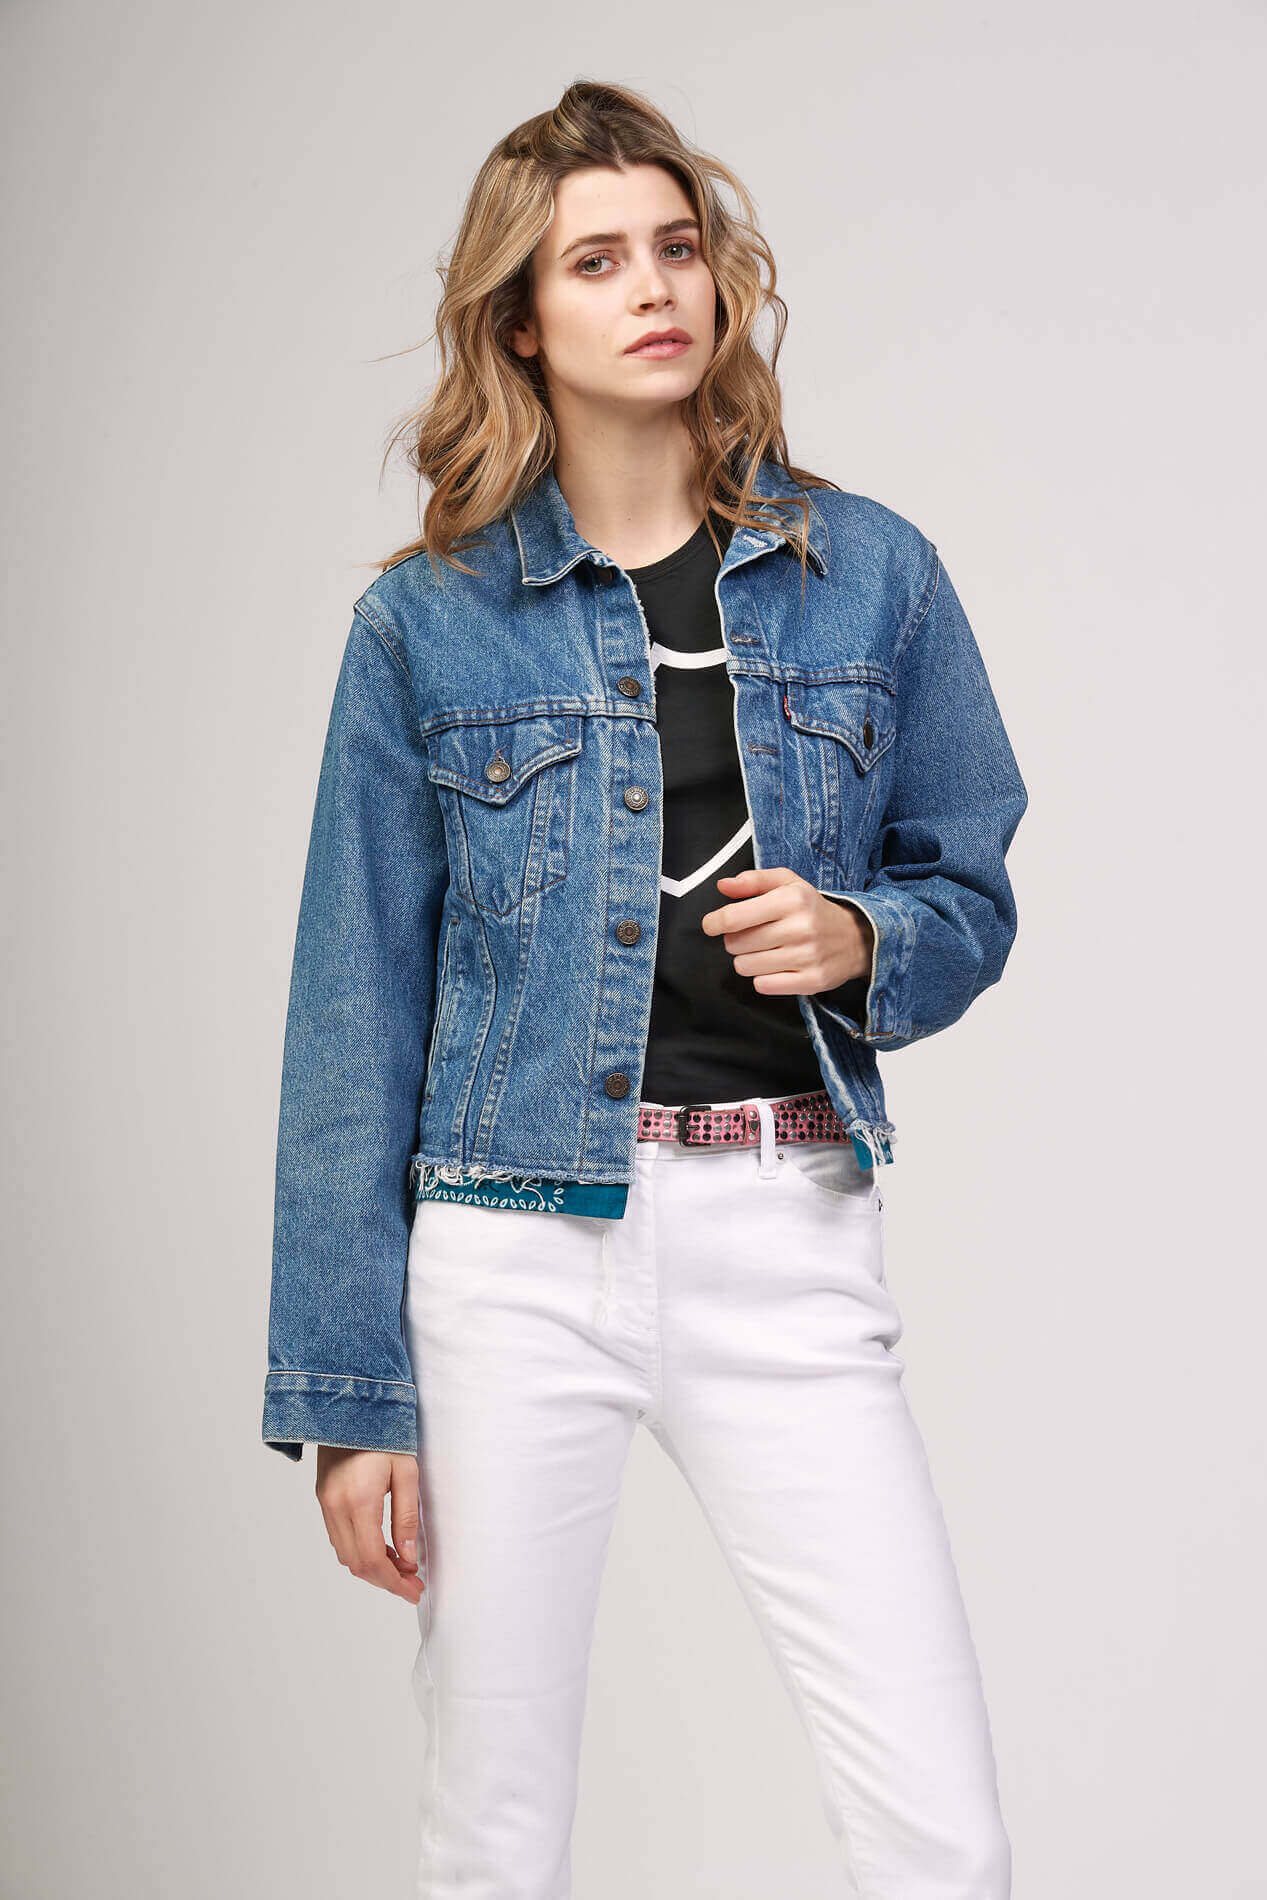 BANDANA DENIM JACKET Levi's vintage denim jacket. Customized jacket with vintage bandana applicated inside. Every piece is 'one of a kind', designed using handcrafted materials. As a result of this process there will be variations in the shade of the colo